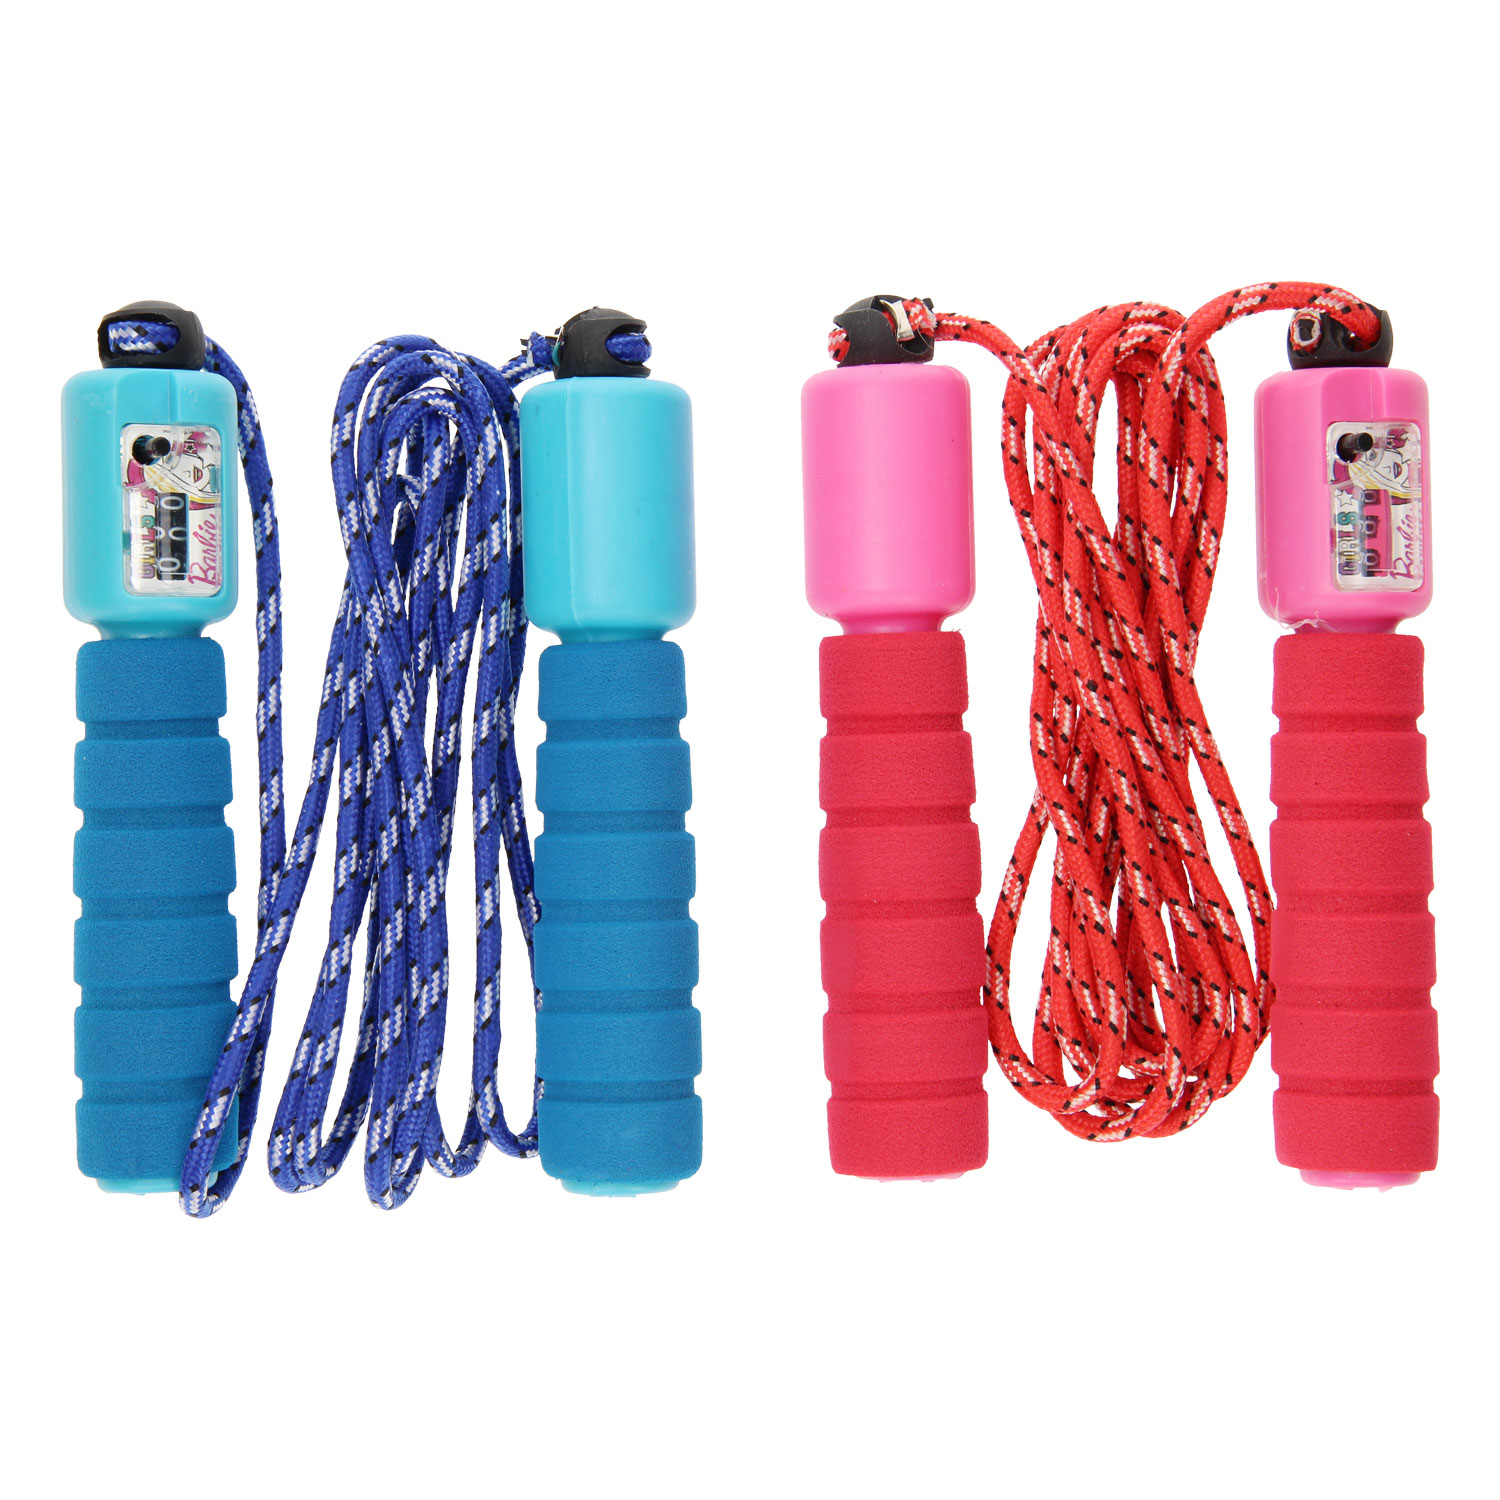 Kids Childrens Skipping Rope Jumping Rope Official Disney Princess Character 